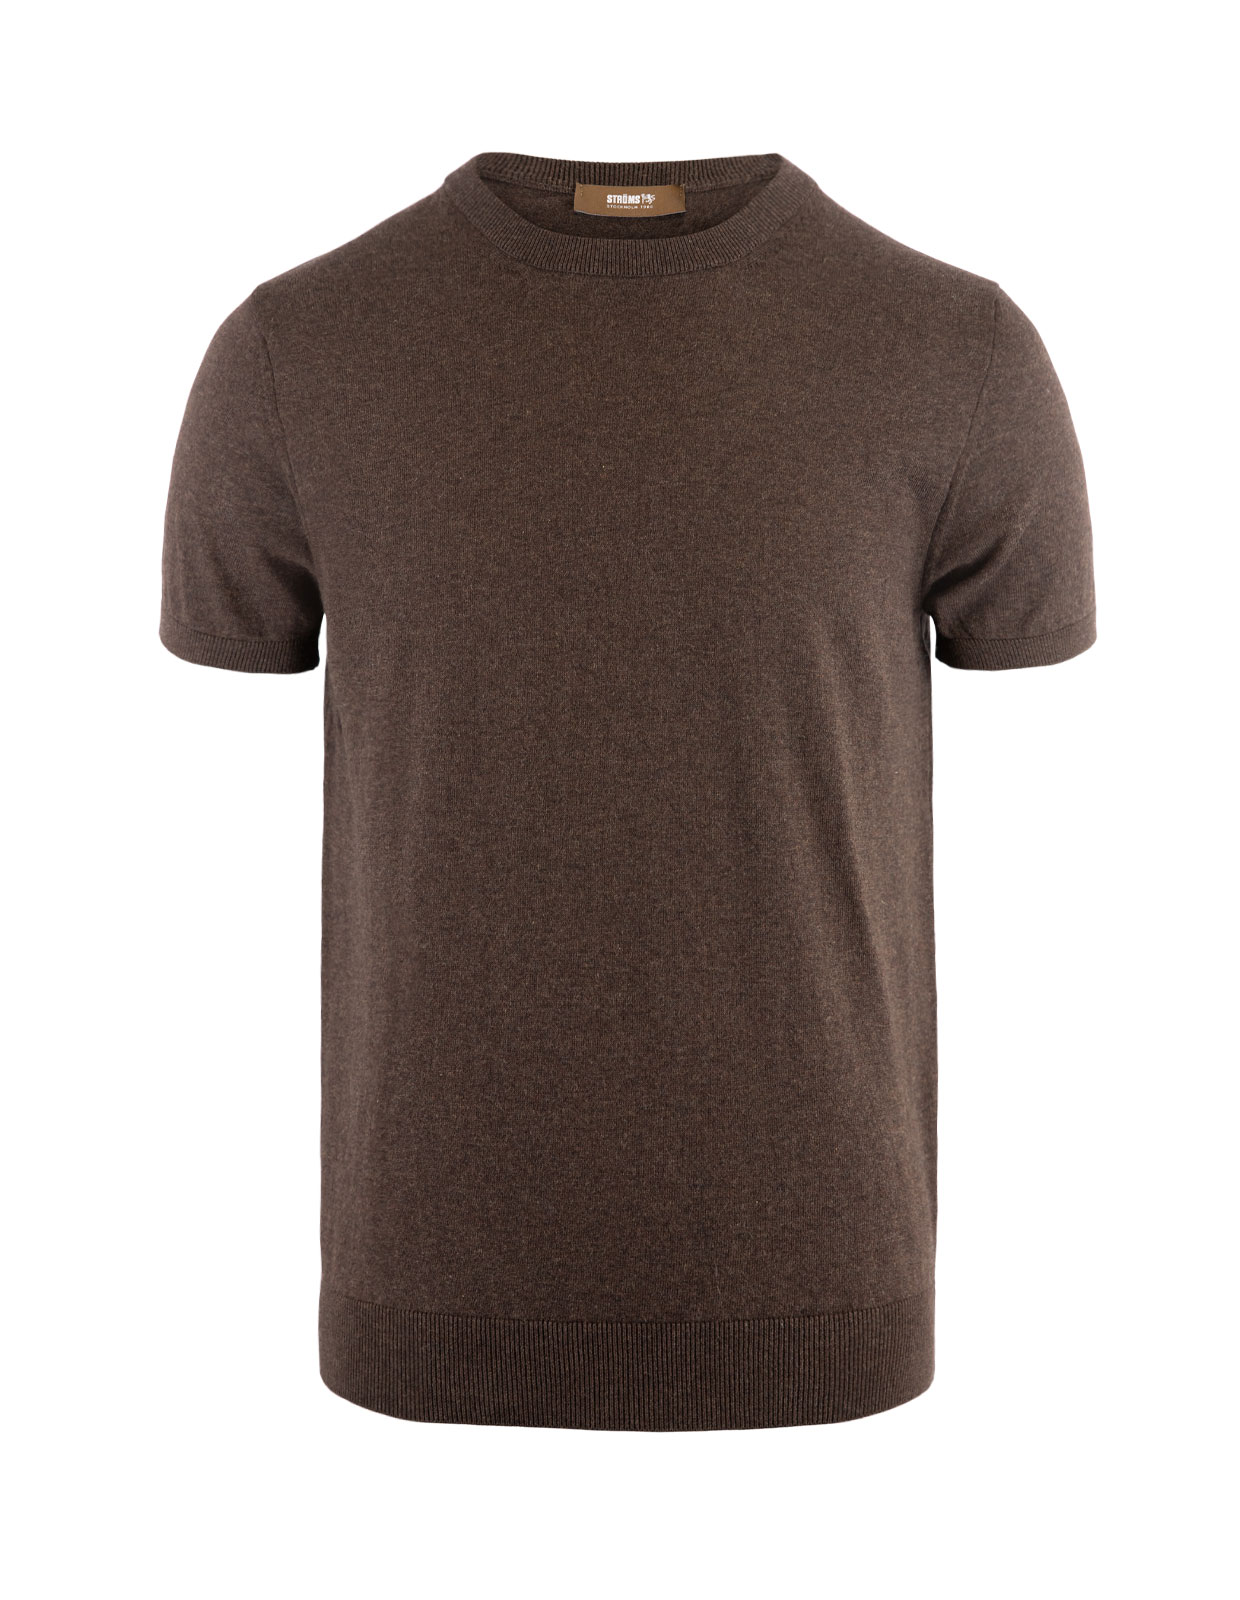 New T-Shirt Fine Knitted Cotton Chocolate